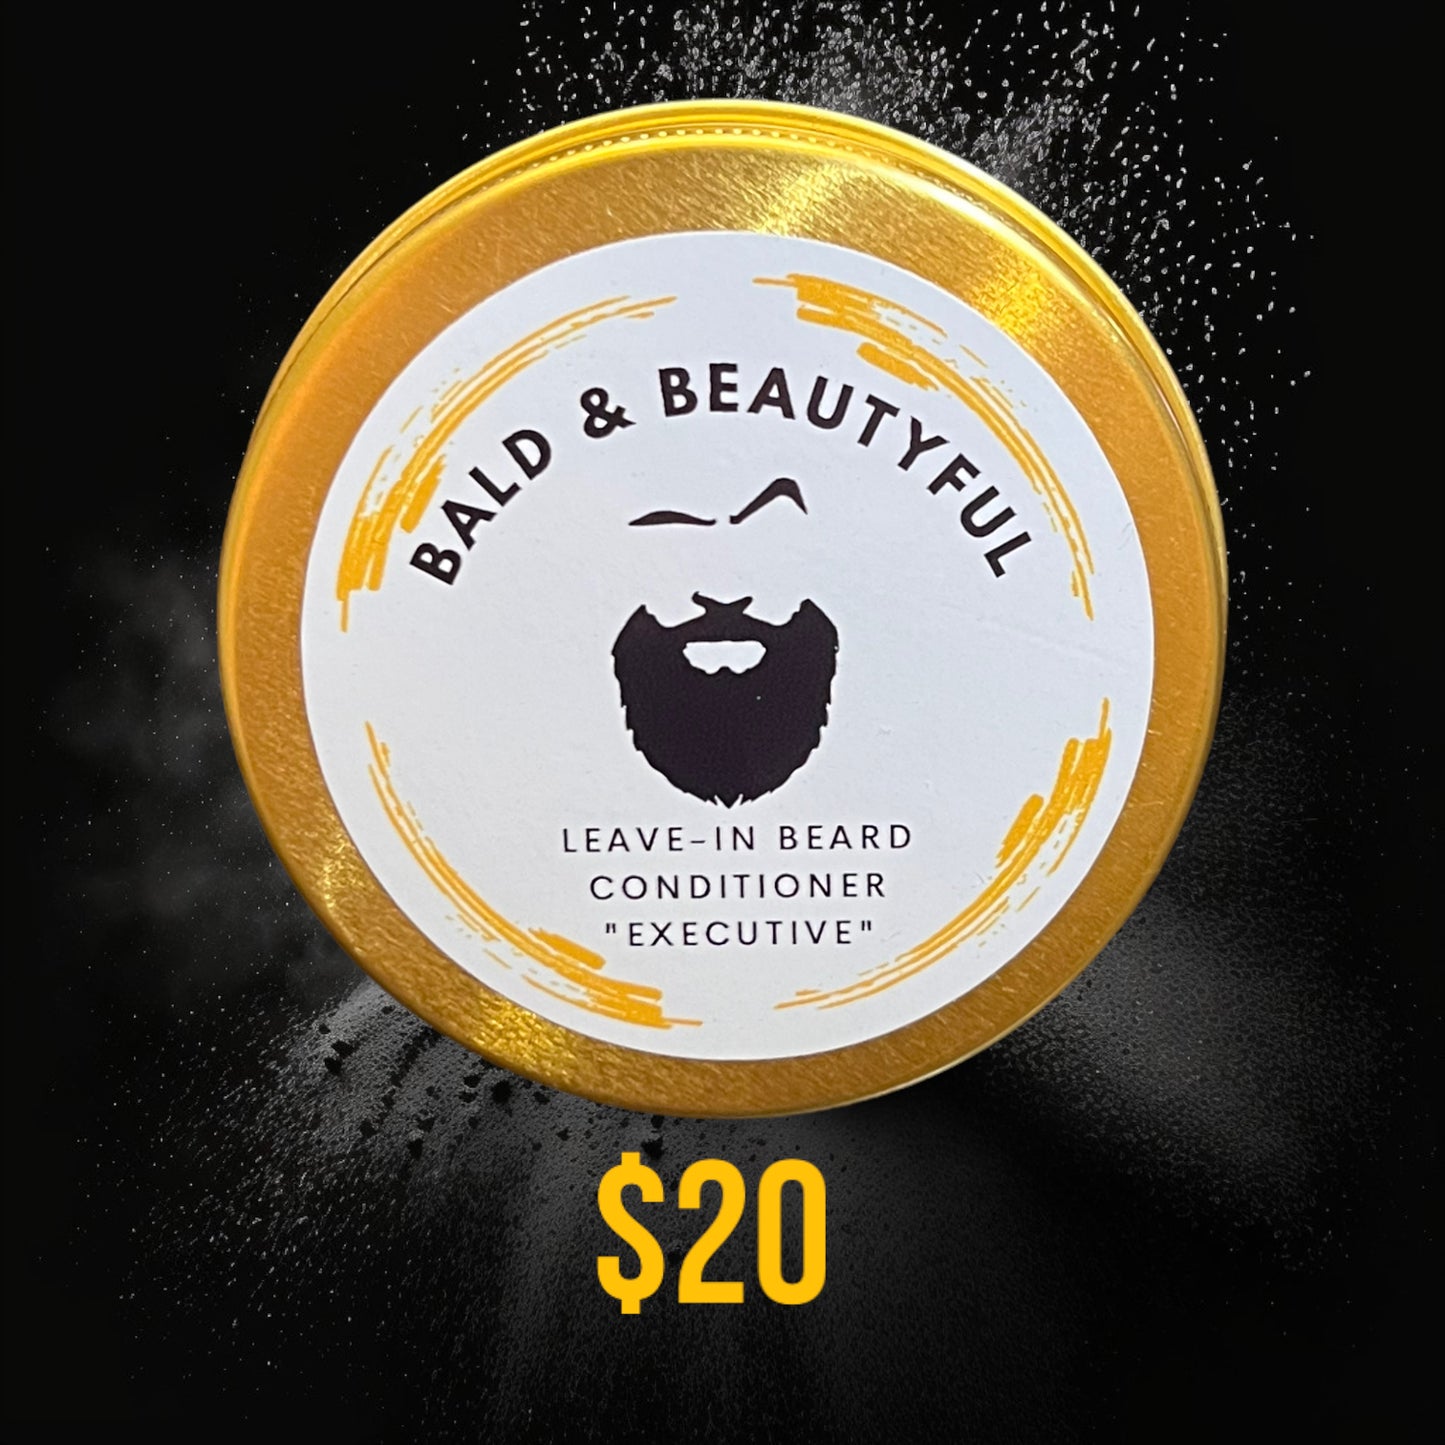 "Executive" Leave-In Beard Conditioner